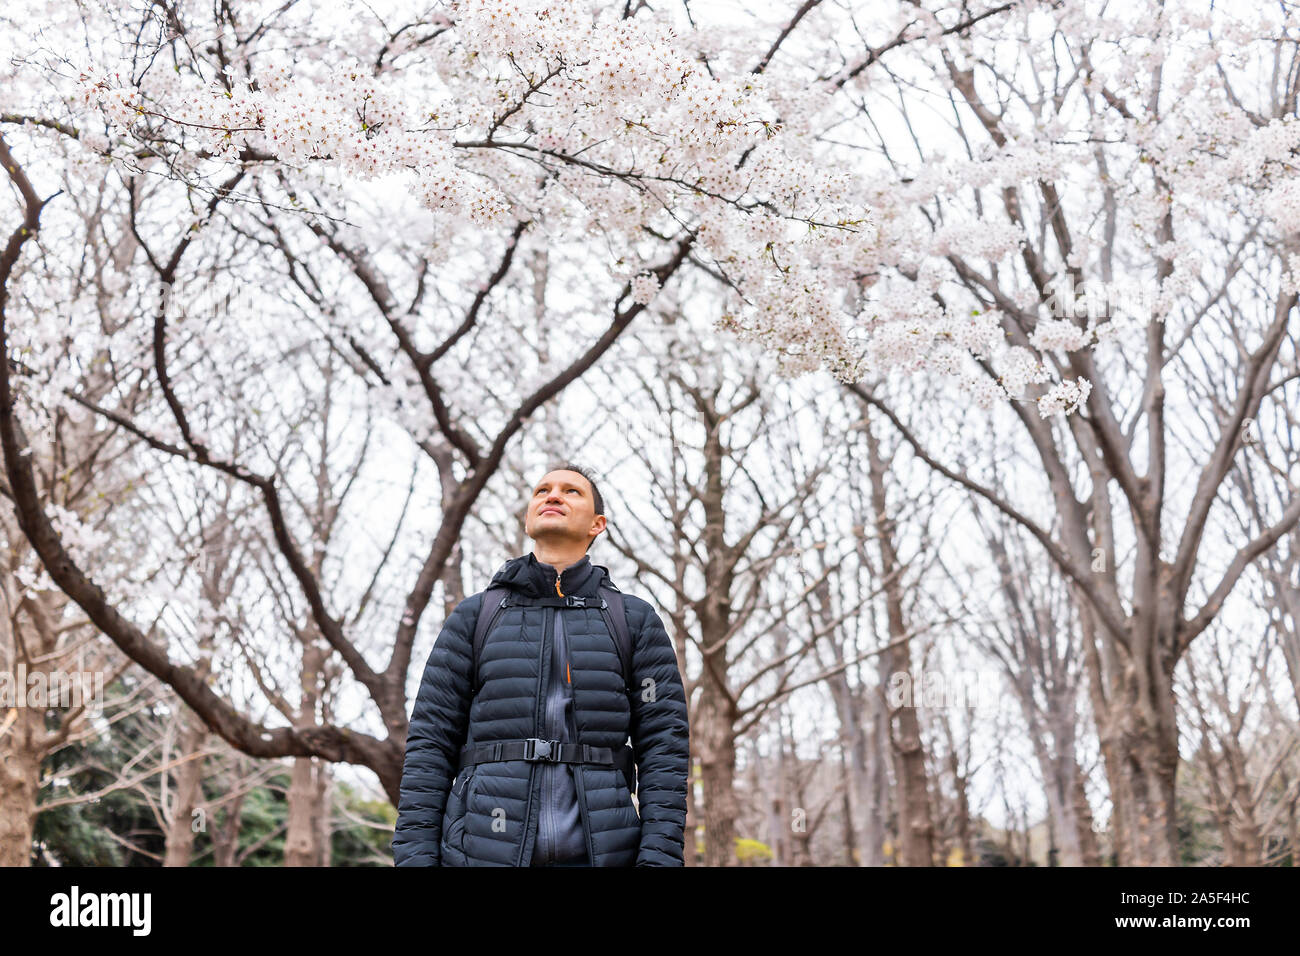 Tokyo, Japan Yoyogi park with young tourist man standing under canopy of sakura flowers pink white cherry blossom trees Stock Photo